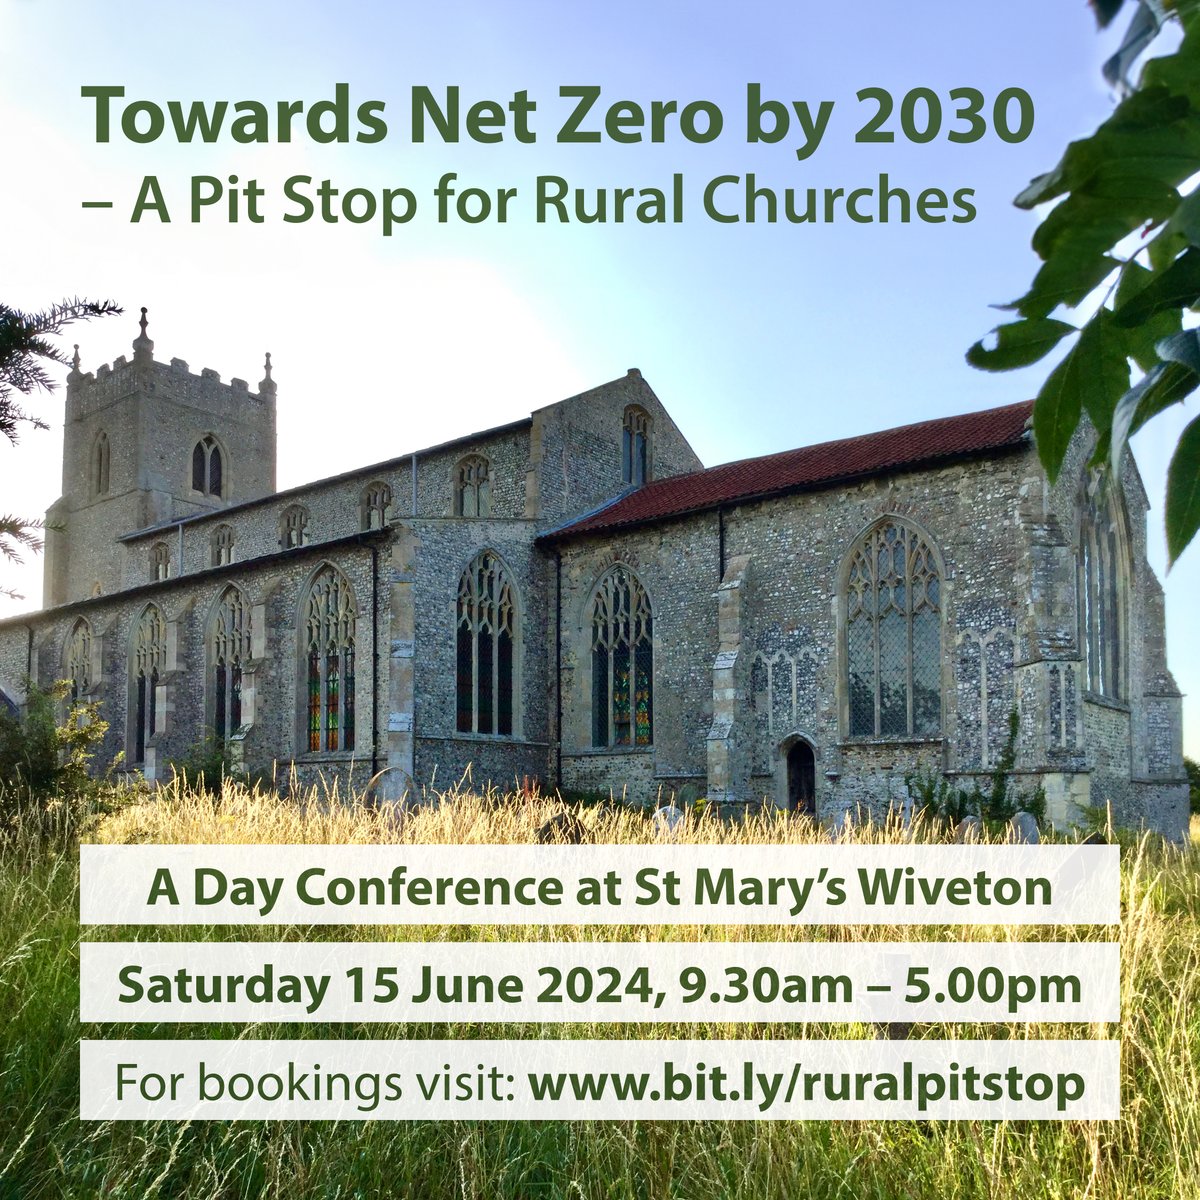 Come explore positive environmental actions for our churches and practical steps to achieving net zero by 2030. Guest speakers include: 🌱@bishopnorwich 🌱 Polly Eaton, @ARochaUK 🌱 @HistoricEngland 🌱 @HeritageFundUK 🌱 @NorfolkWT 🌱 @NorthNorfolkDC dioceseofnorwich.org/event/towards-…